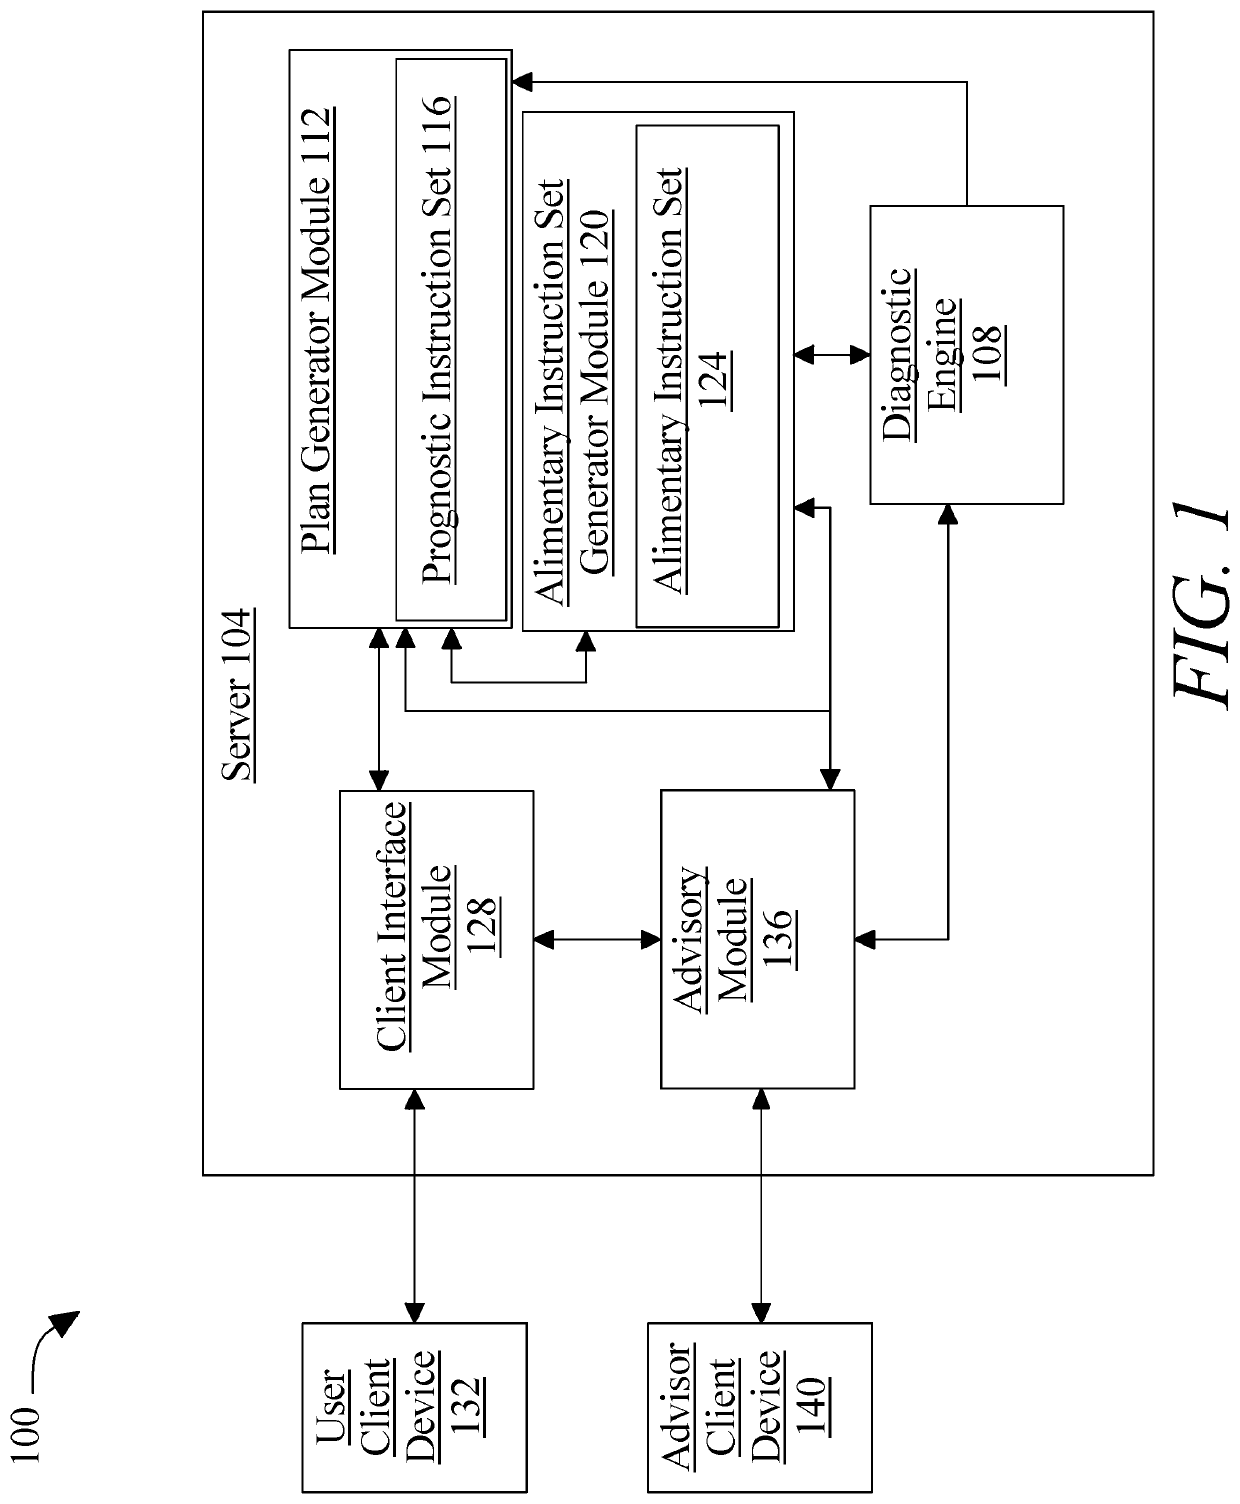 Systems and methods for generating alimentary instruction sets based on vibrant constitutional guidance